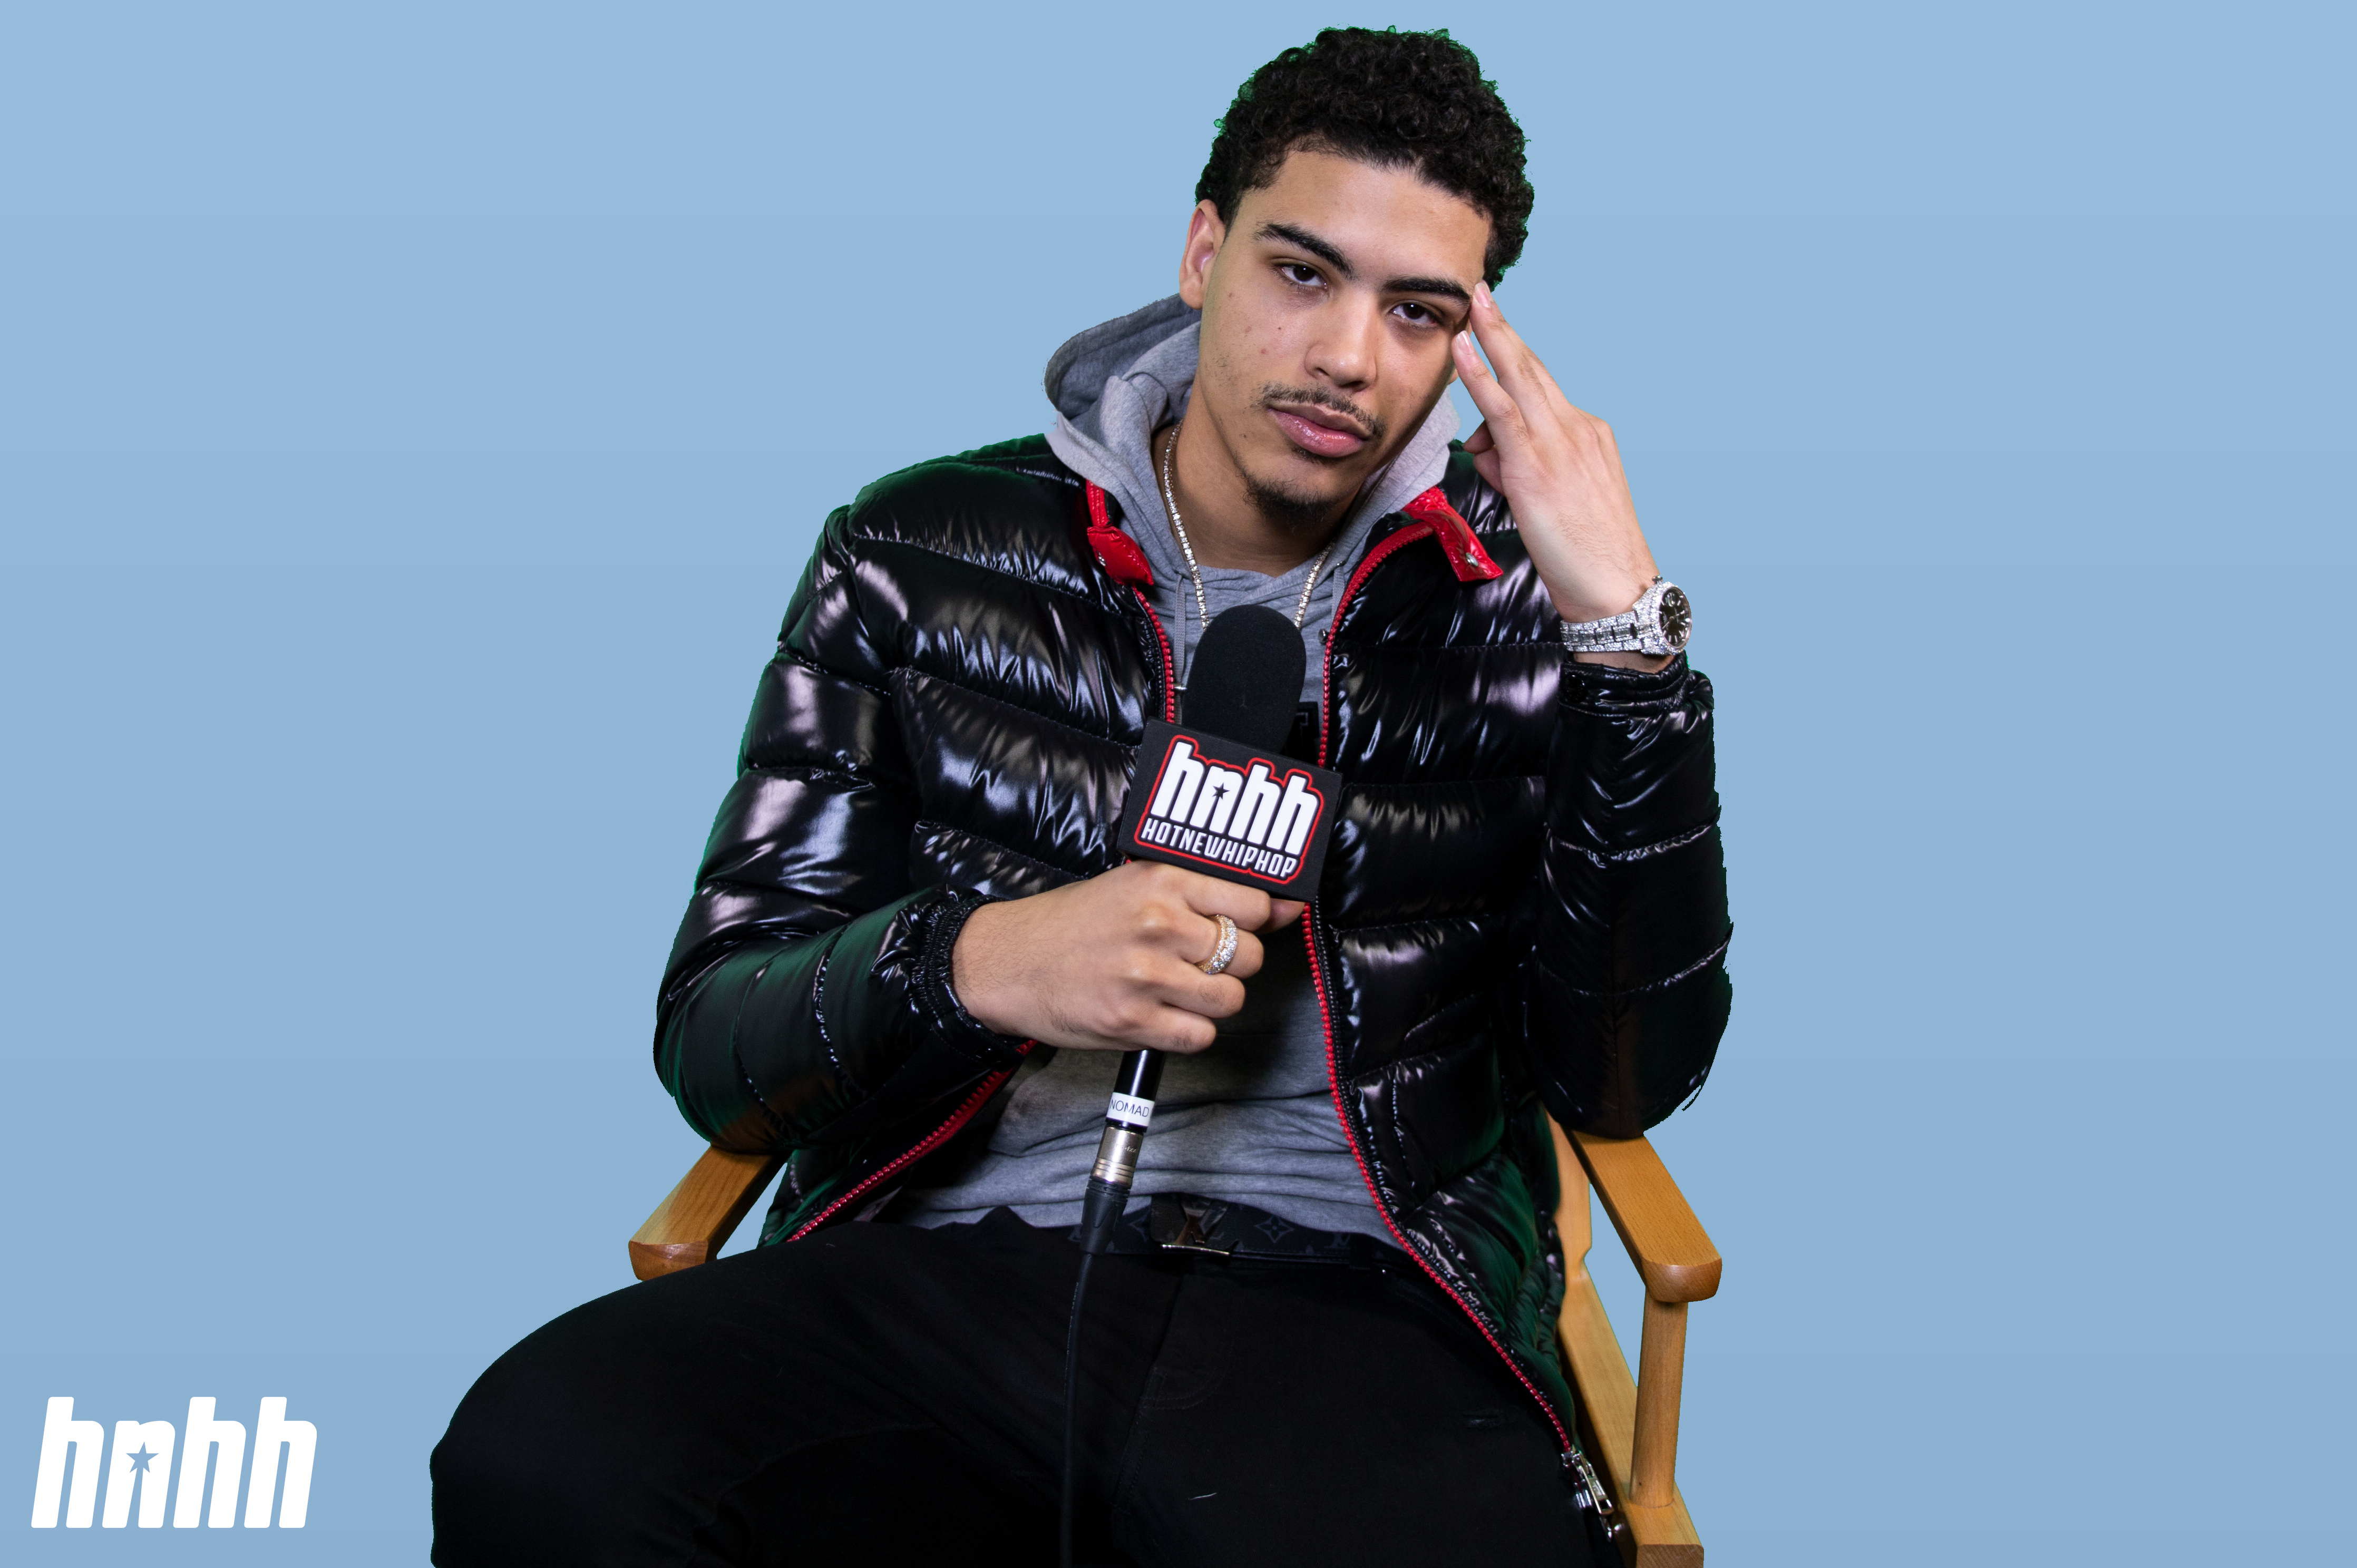 Jay Critch Says His Sound Is The “New Wave Of New York” In “On The Come Up”